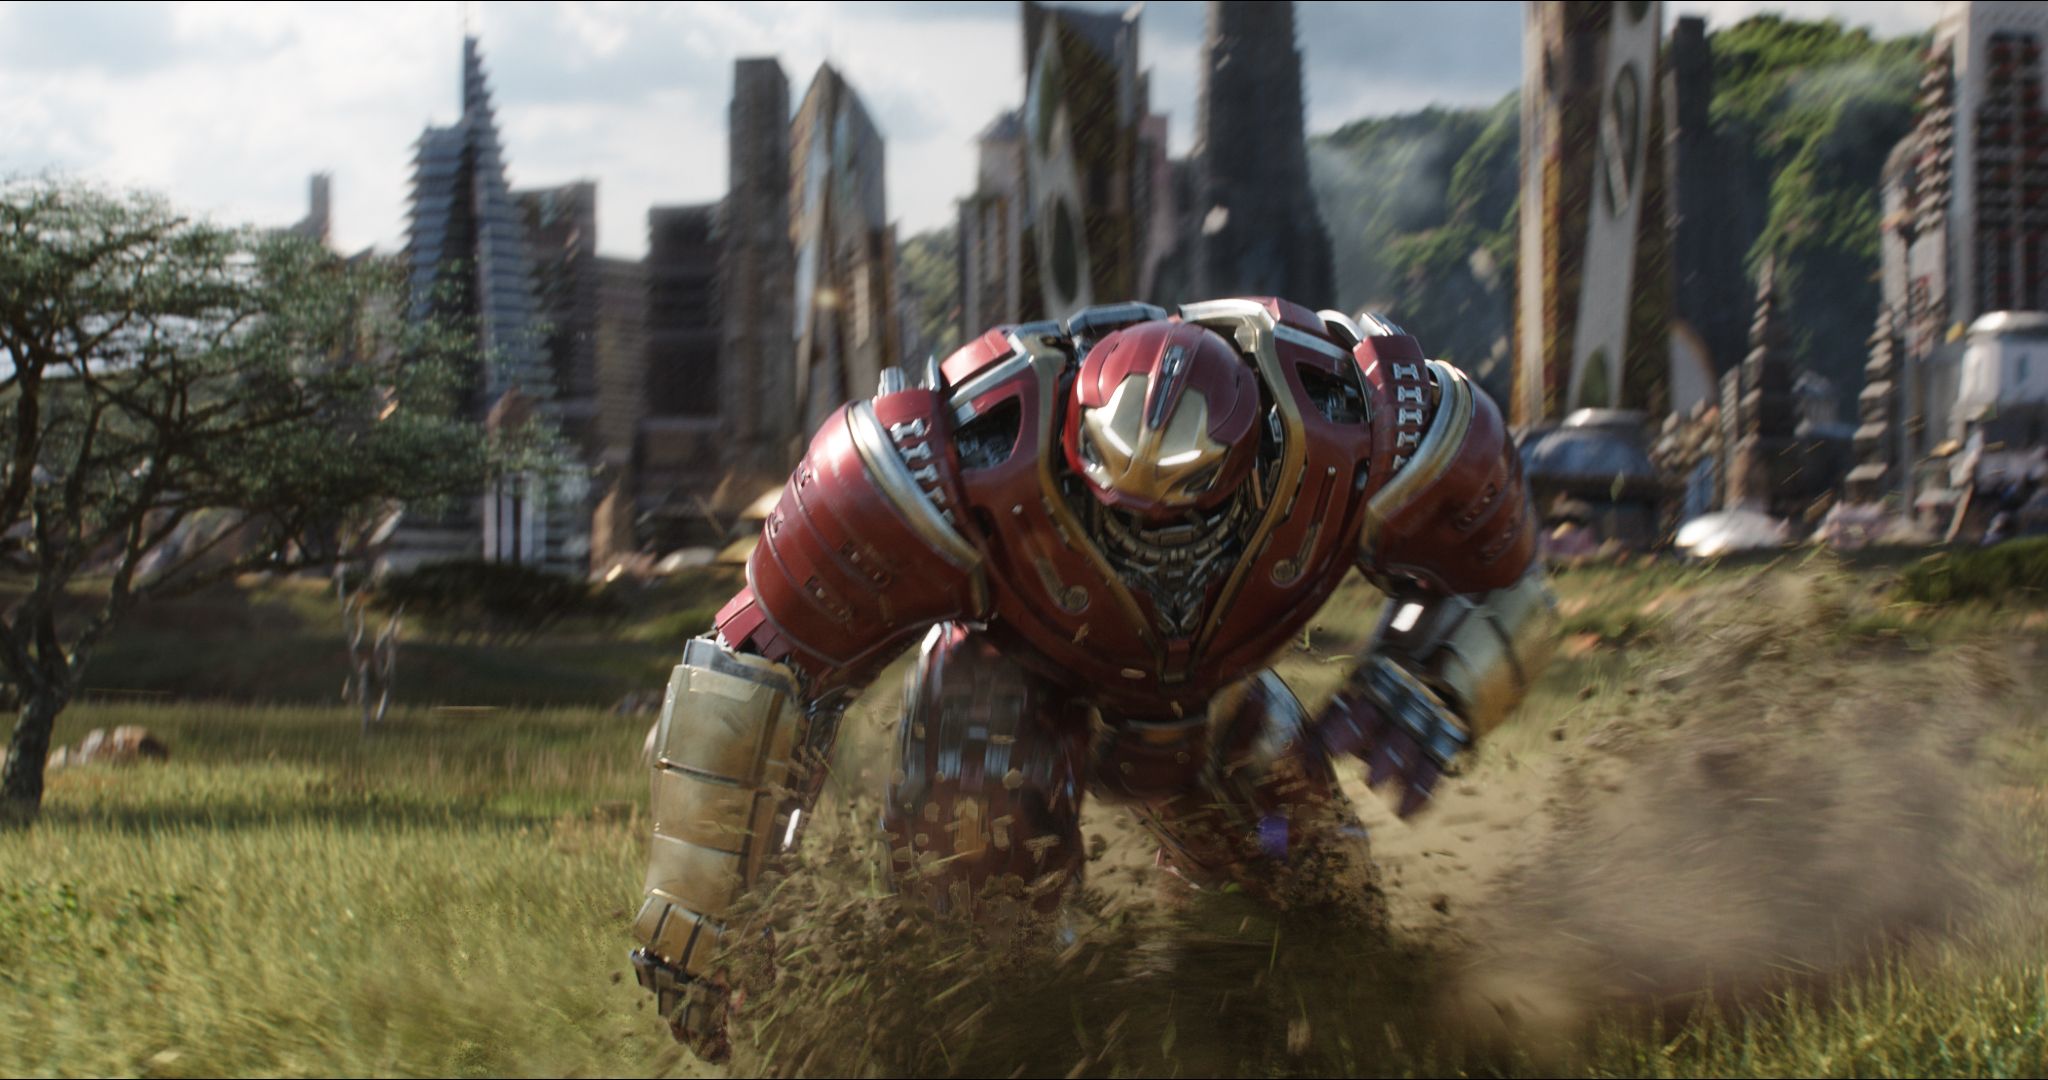 Avengers: Infinity War: 15 High Res Image Tease The Battle Ahead